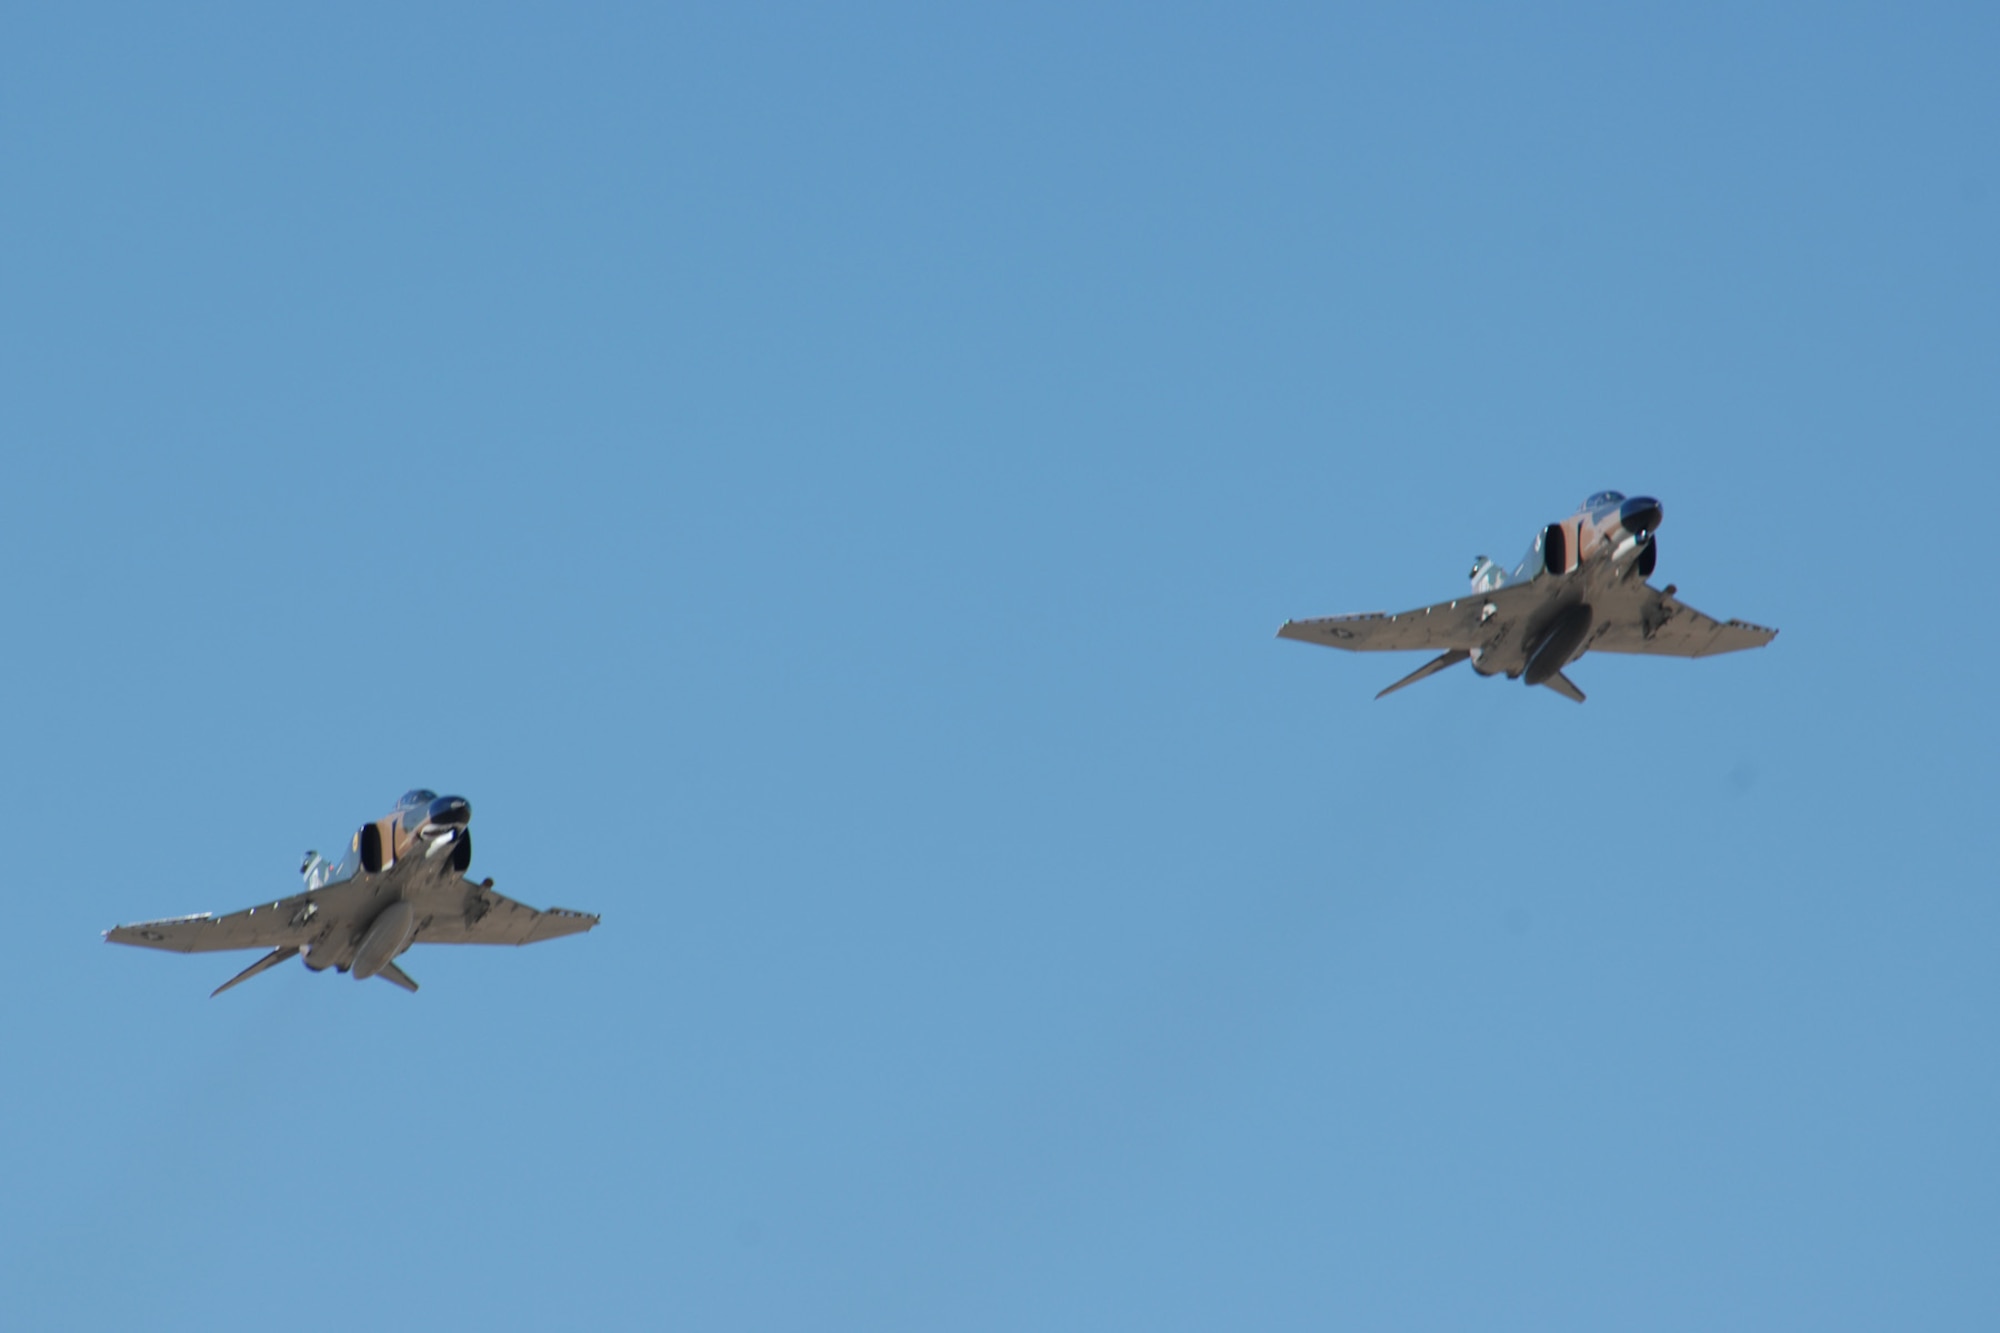 Brig. Gen. David Goldfein, 49th Fighter Wing commander, and Lt. Col. Joel Rush, Detachment 1, 82nd Aerial Targets Squadron commander, fly F-4 Phantoms over the skies of Holloman Air Force Base, N.M., Dec. 20, 2007. The Phantom was designed and manufactured by the McDonnell Douglas aviation company. (U.S. Air Force photo/Airman 1st Class Jamal D. Sutter)